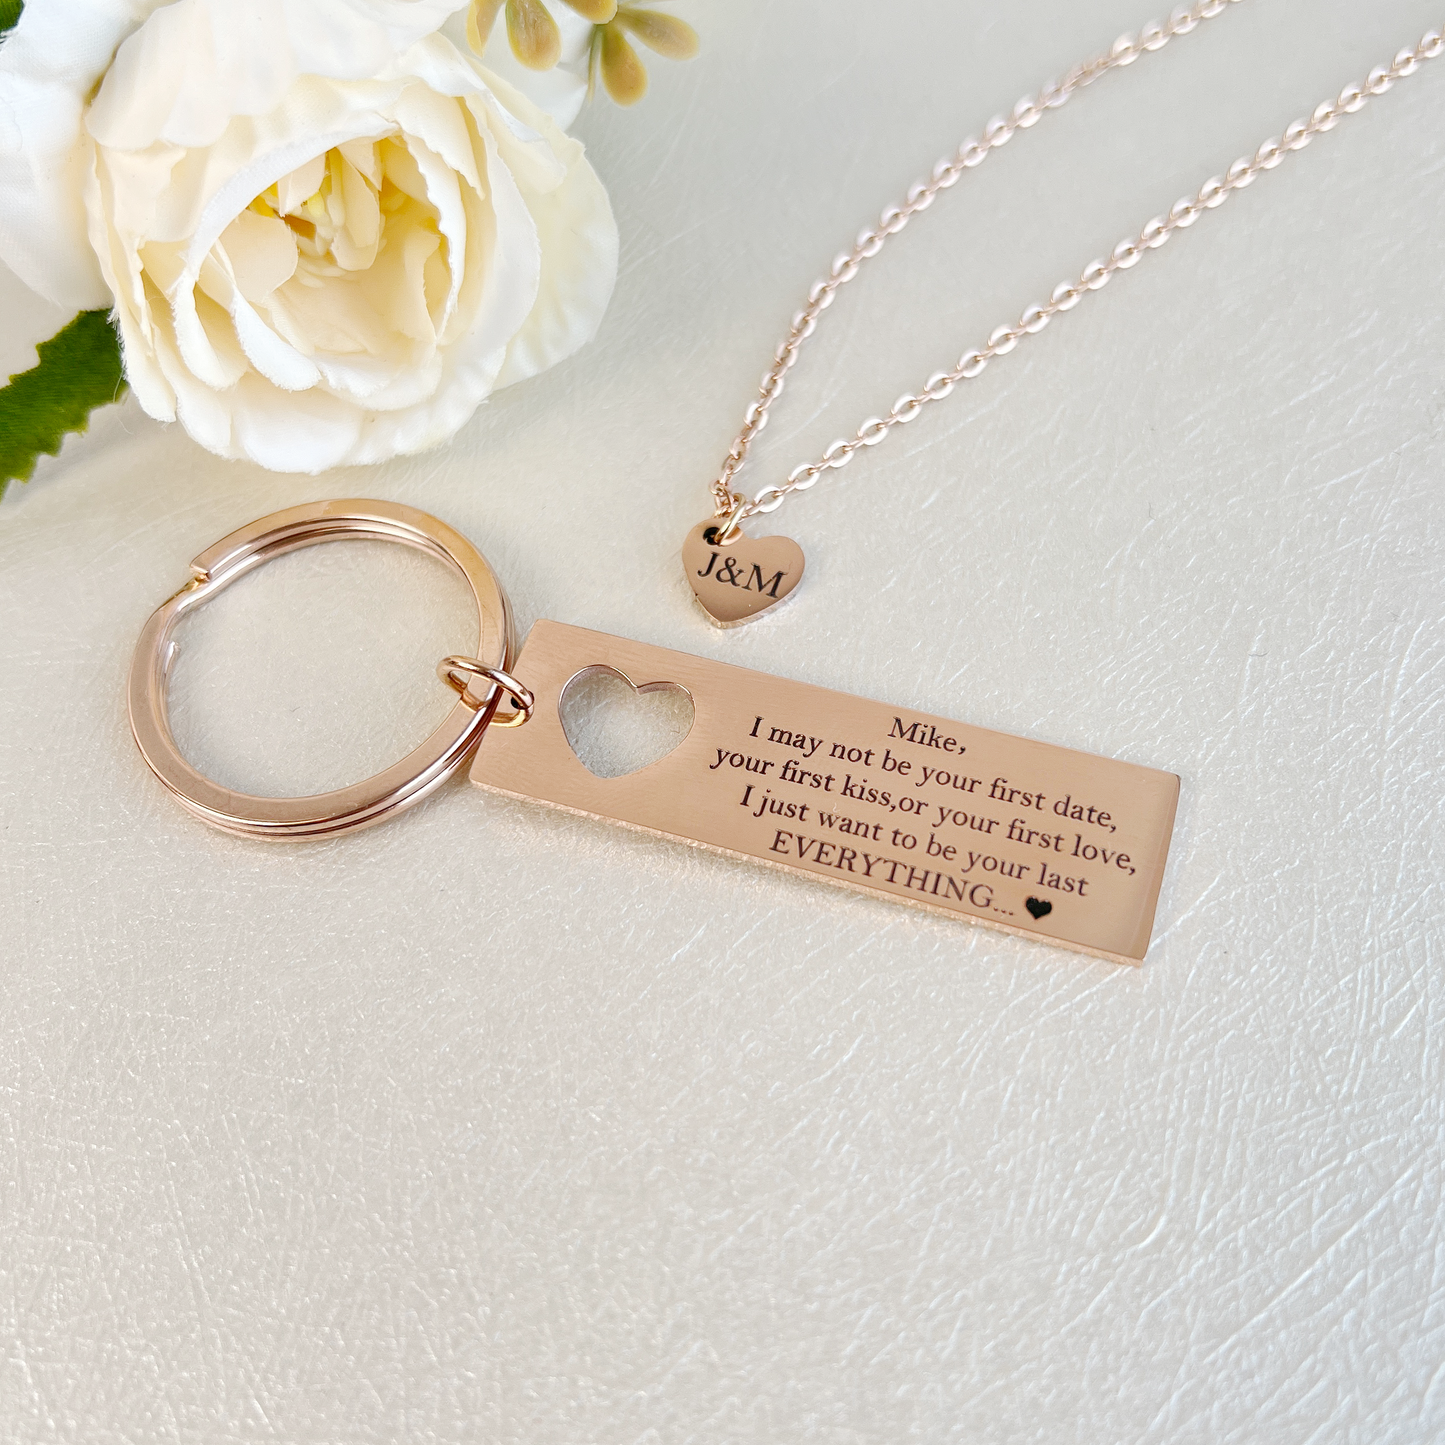 Personalized Keychain for Couples